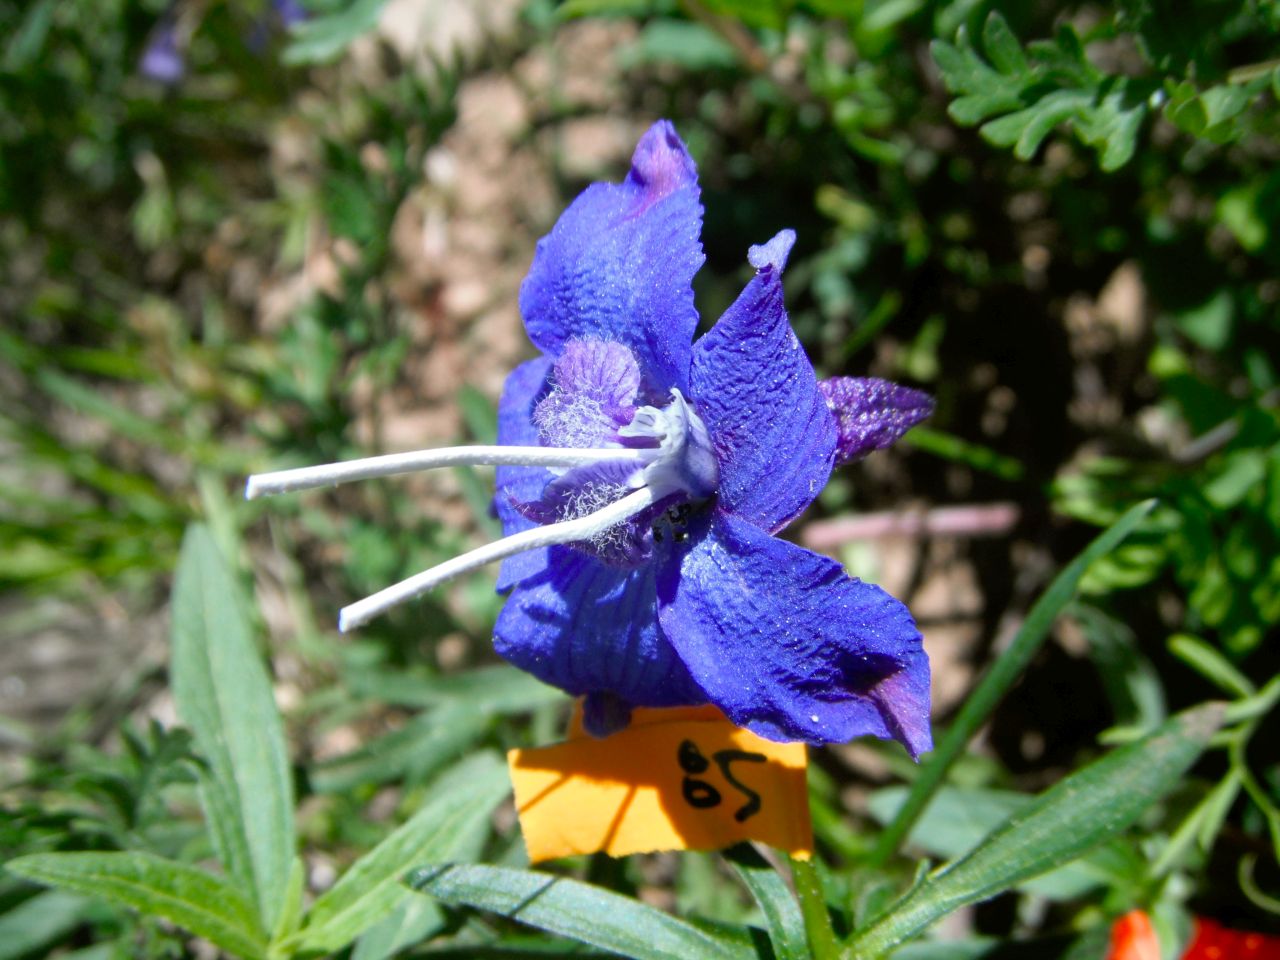 Using paper wicks to remove nectar from two nectar spurs in a Delphinium nuttallianum (larkspur) flower.